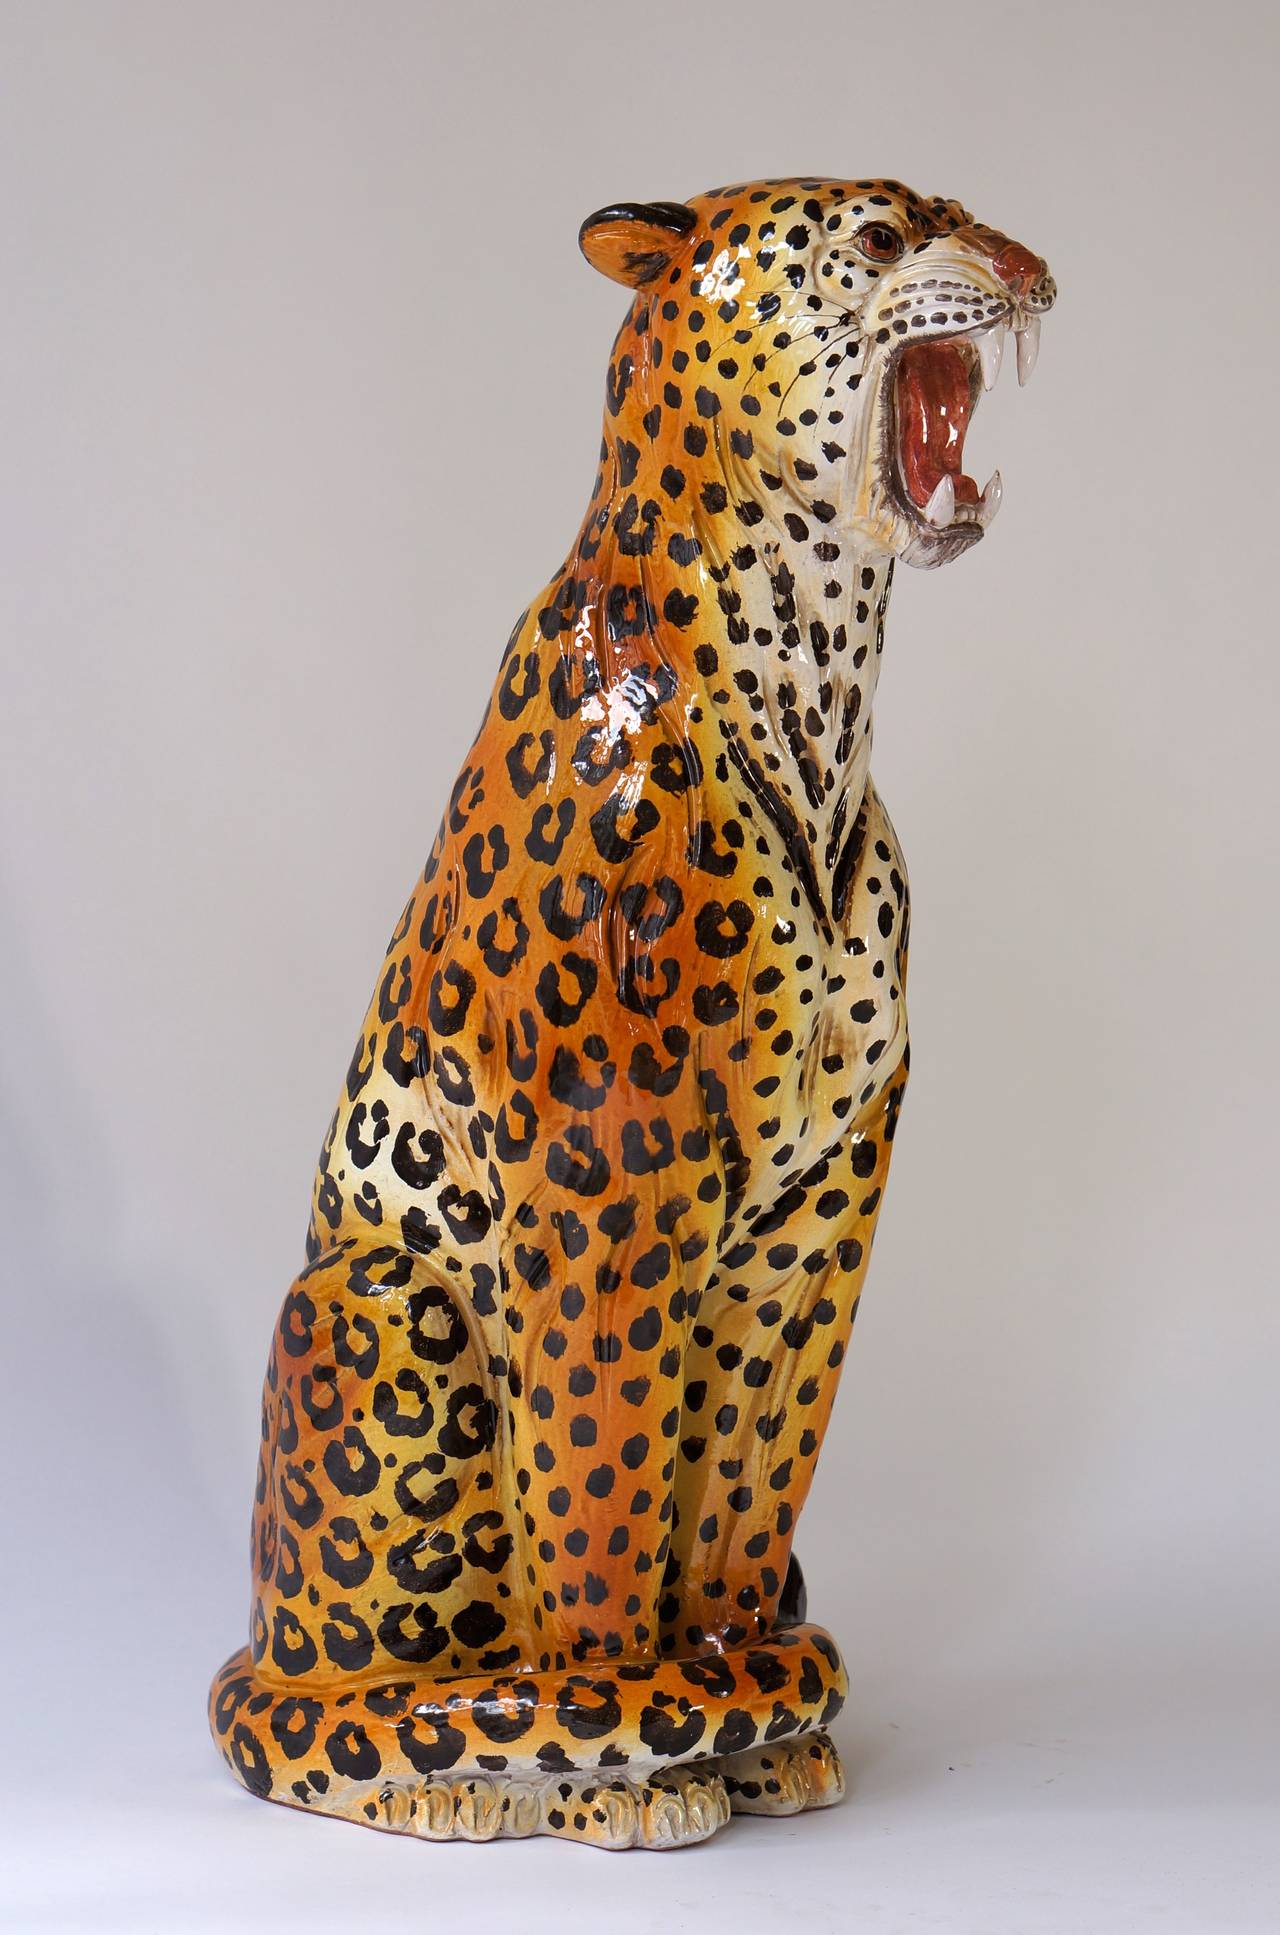 Italian vintage cheetah sculpture in polychrome ceramic. The life-like pose and expression are captivating.